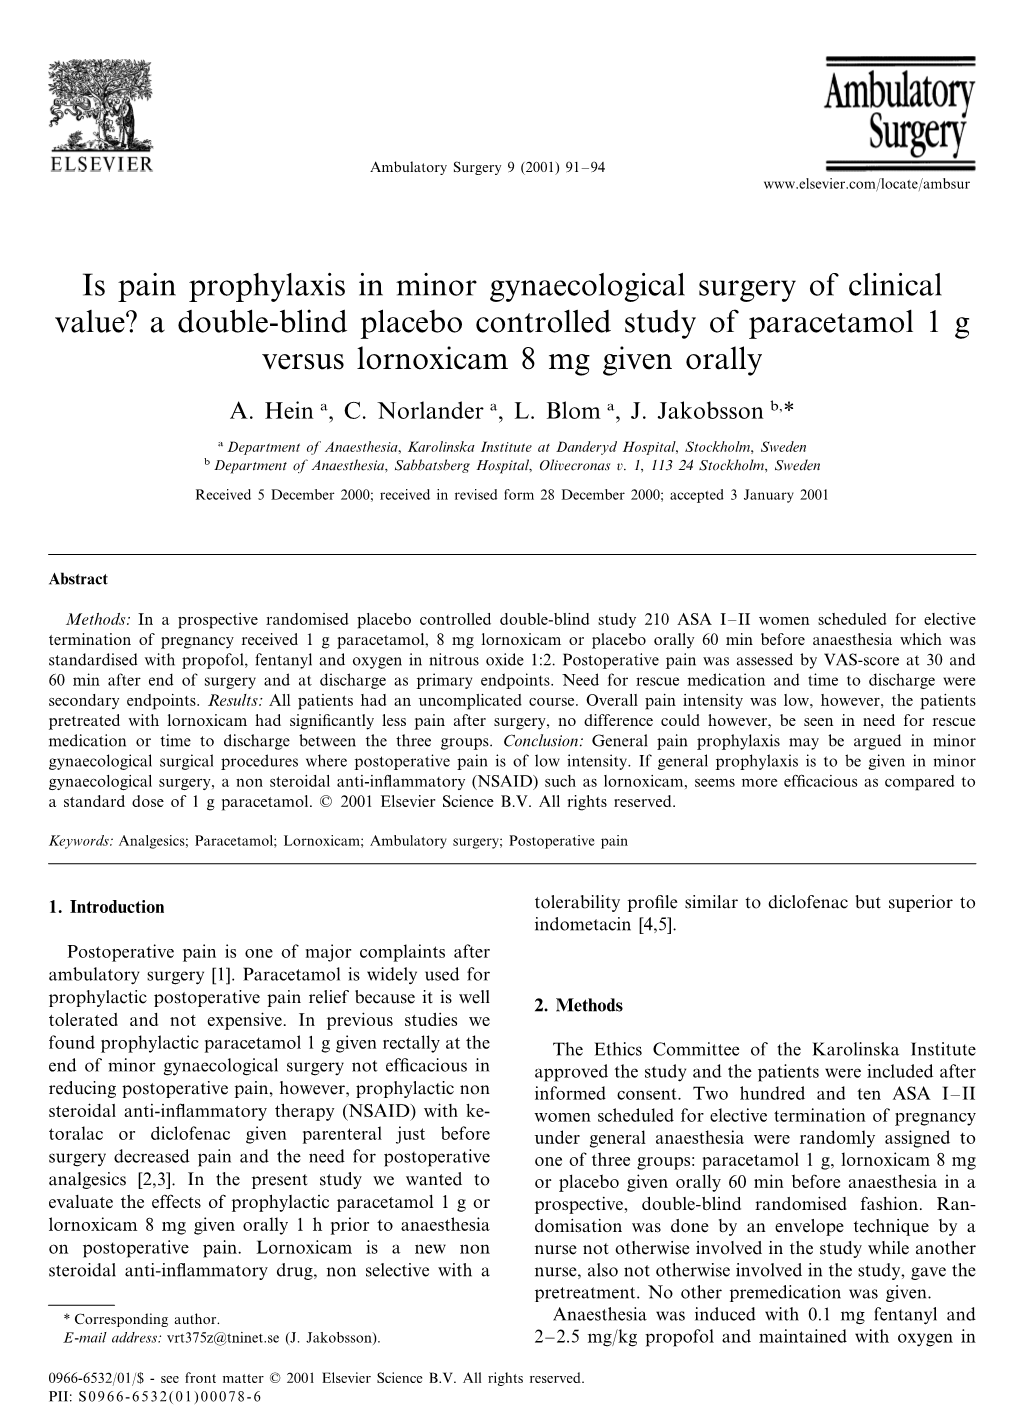 Is Pain Prophylaxis in Minor Gynaecological Surgery of Clinical Value? a Double-Blind Placebo Controlled Study of Paracetamol 1 G Versus Lornoxicam 8 Mg Given Orally